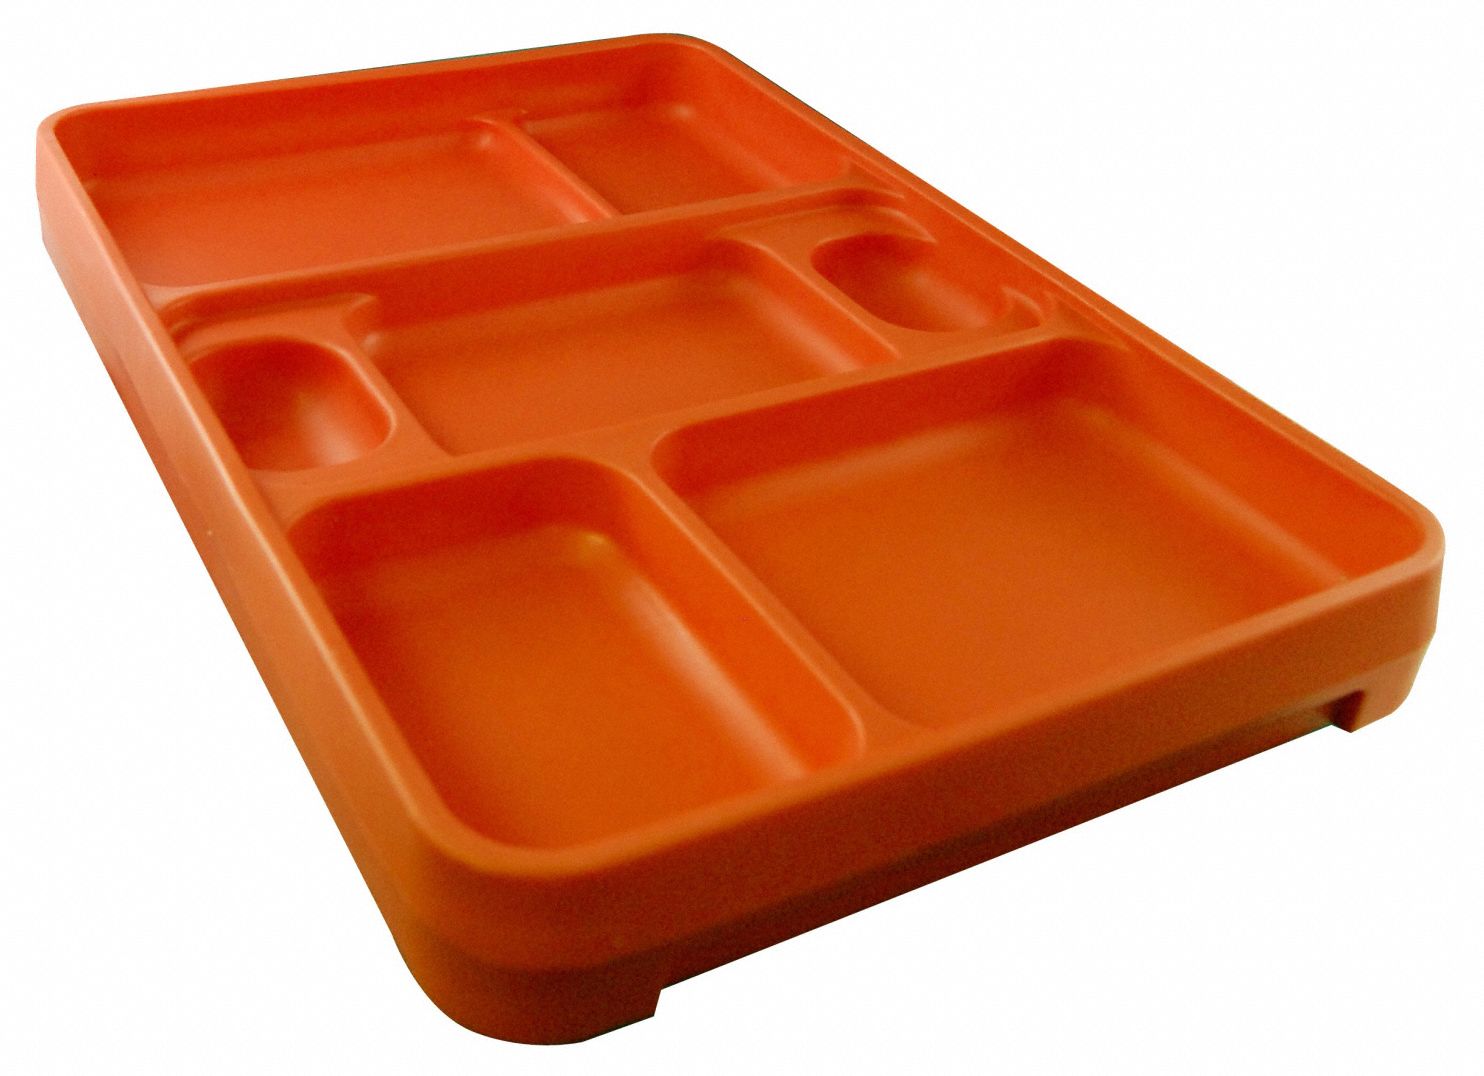 Rock Food Tray Orange: w/ Compartments, 14 1/4 in Overall Lg, 9 1/2 in Overall Wd, 10 PK